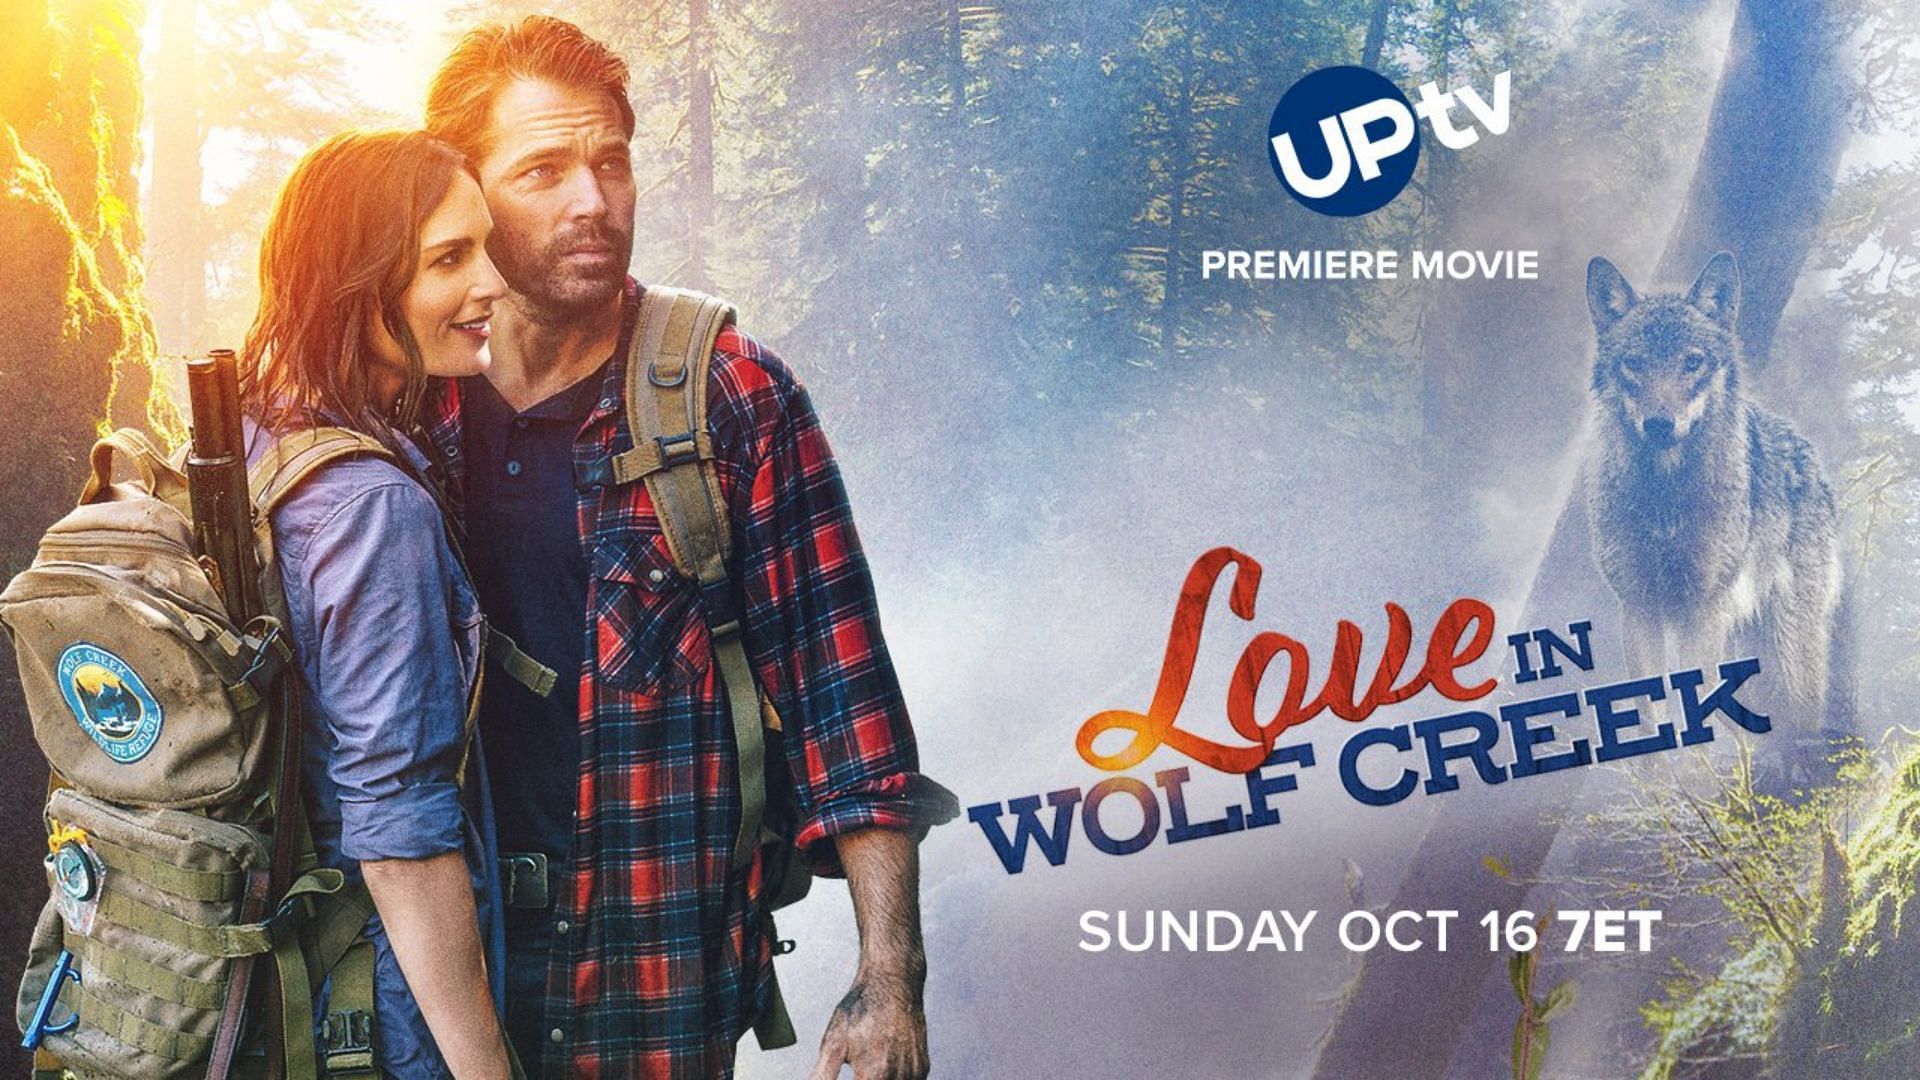 Love in Wolf Creek promotional poster (Image via UP tv)